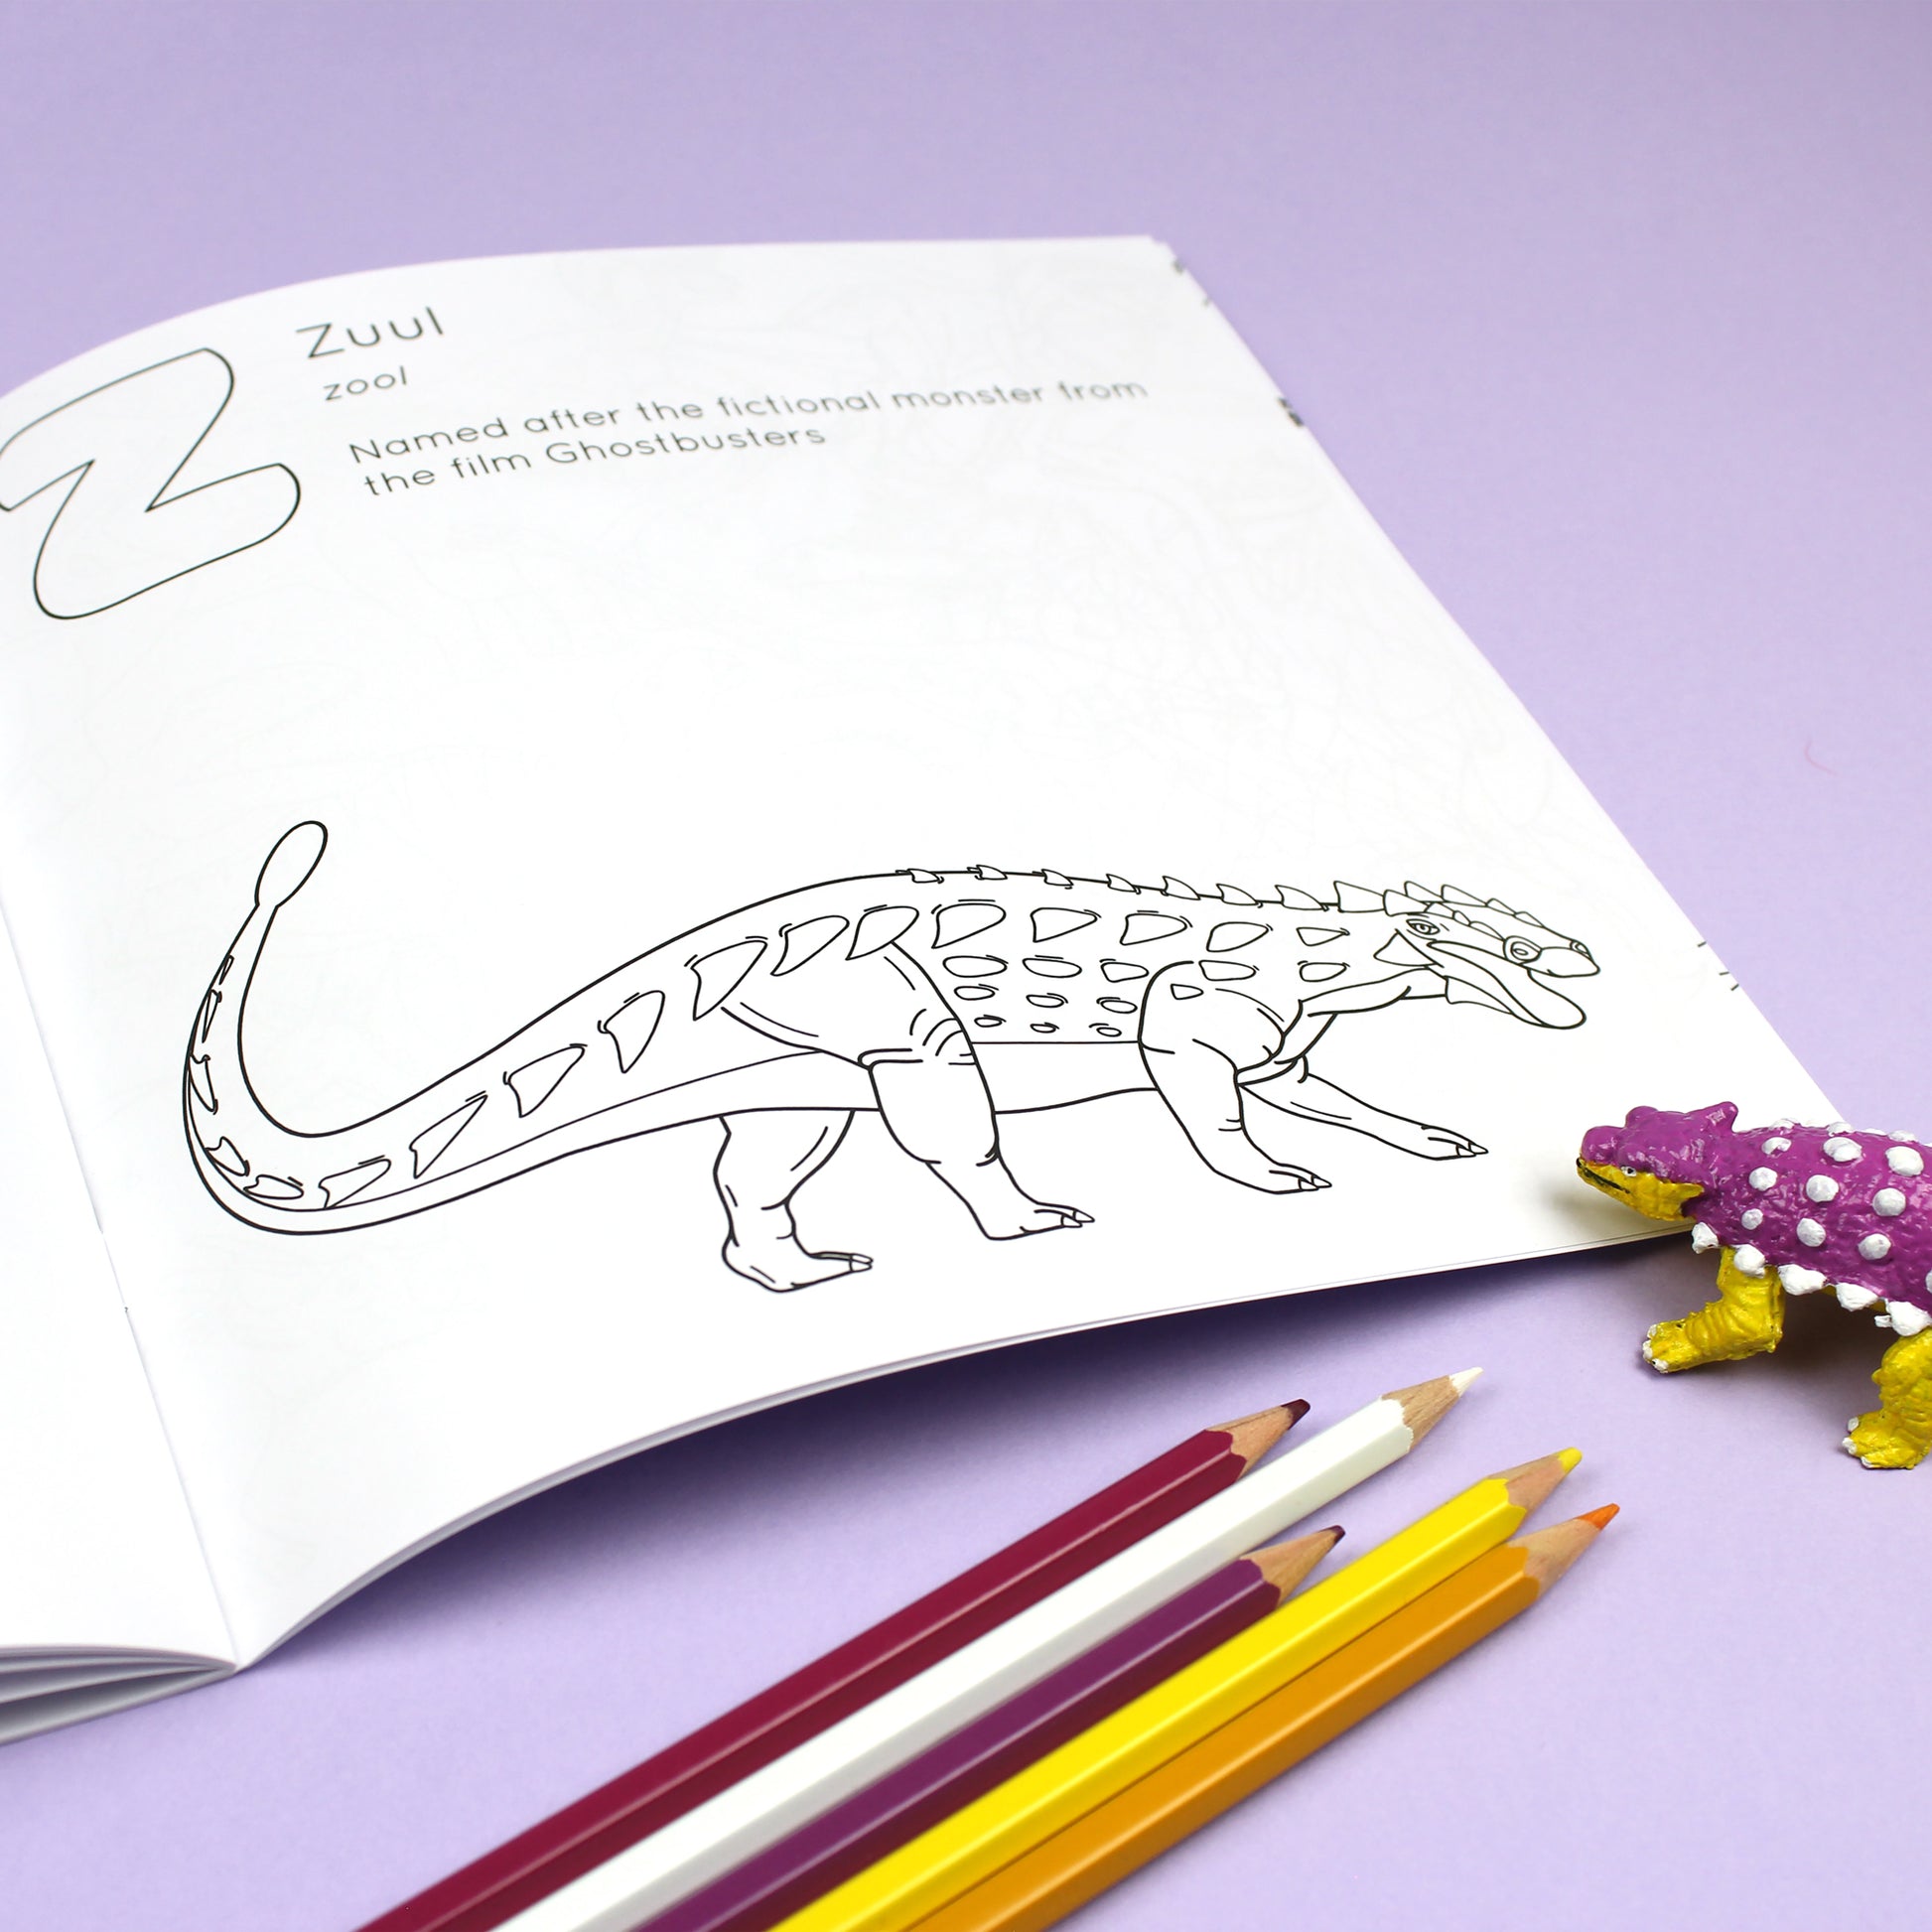 Inside page of ABC Dinosaur colouring book. The page features black line illustration of a Zuul dinosaur with its name, pronunciation and meaning above it.